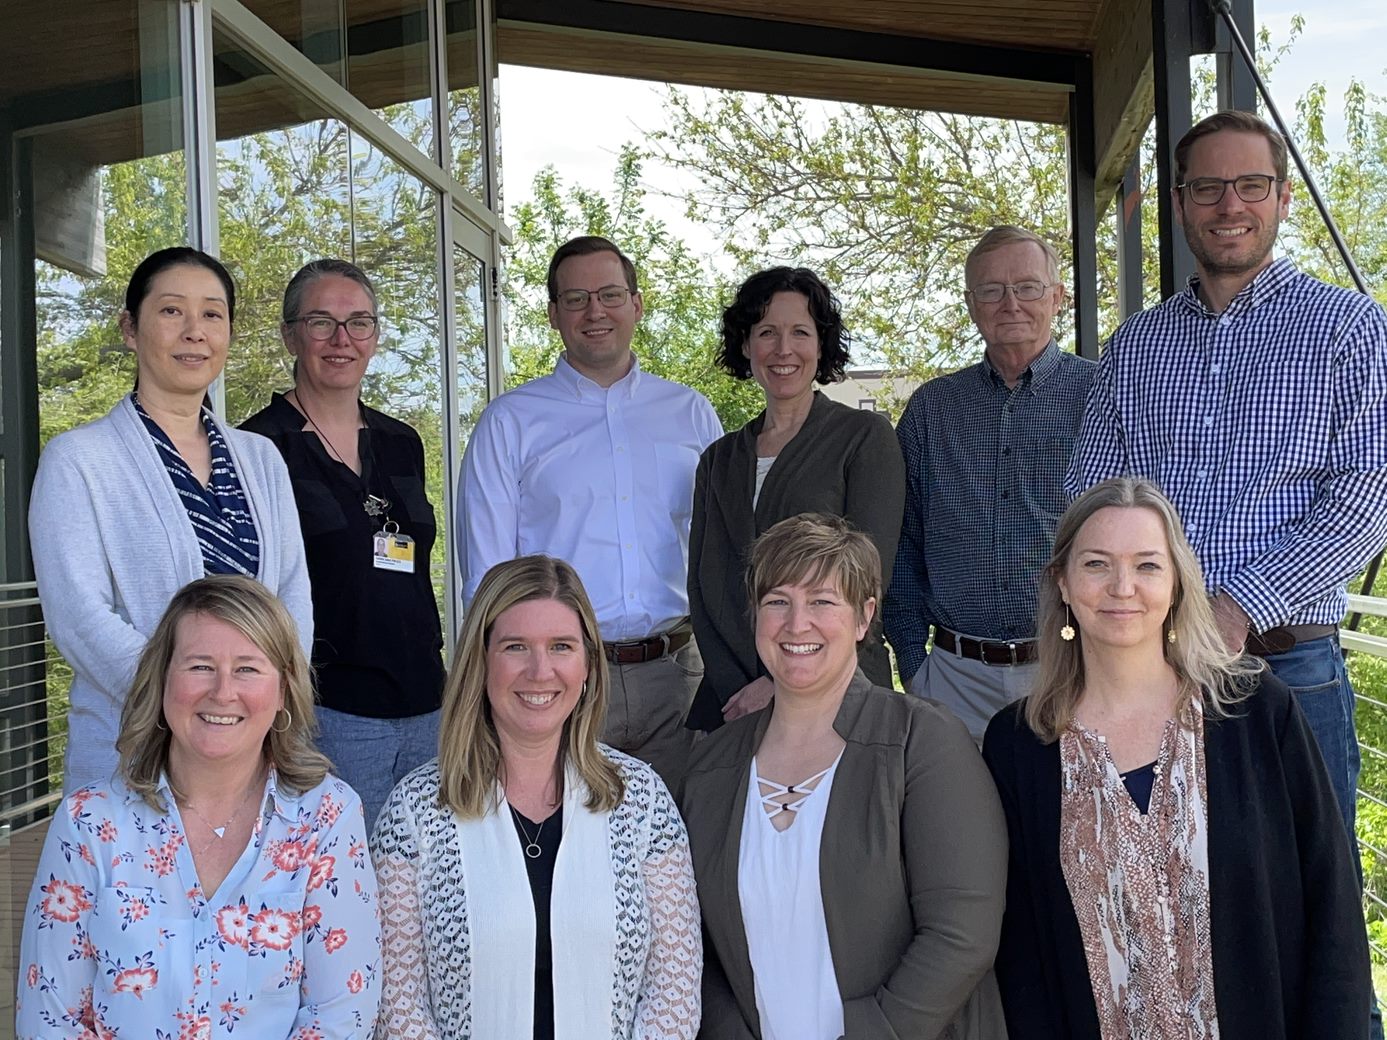 Some of UI IPRC’s Executive Committee members during our strategic planning retreat. From left to right, top: Sato Ashida, Colette Galet, Jon Davis, Carri Casteel, Jim Torner, Mark Berg. From left to right, bottom: Lisa Roth, Kristel Wetjen, Kari Harland and Ann Saba. Not Pictured: Joe Cavanaugh, Cara Hamann, Michele Lilienthal, Ann Marie McCarthy, Dan McGehee, Michelle Reyes, and Diane Rohlman.